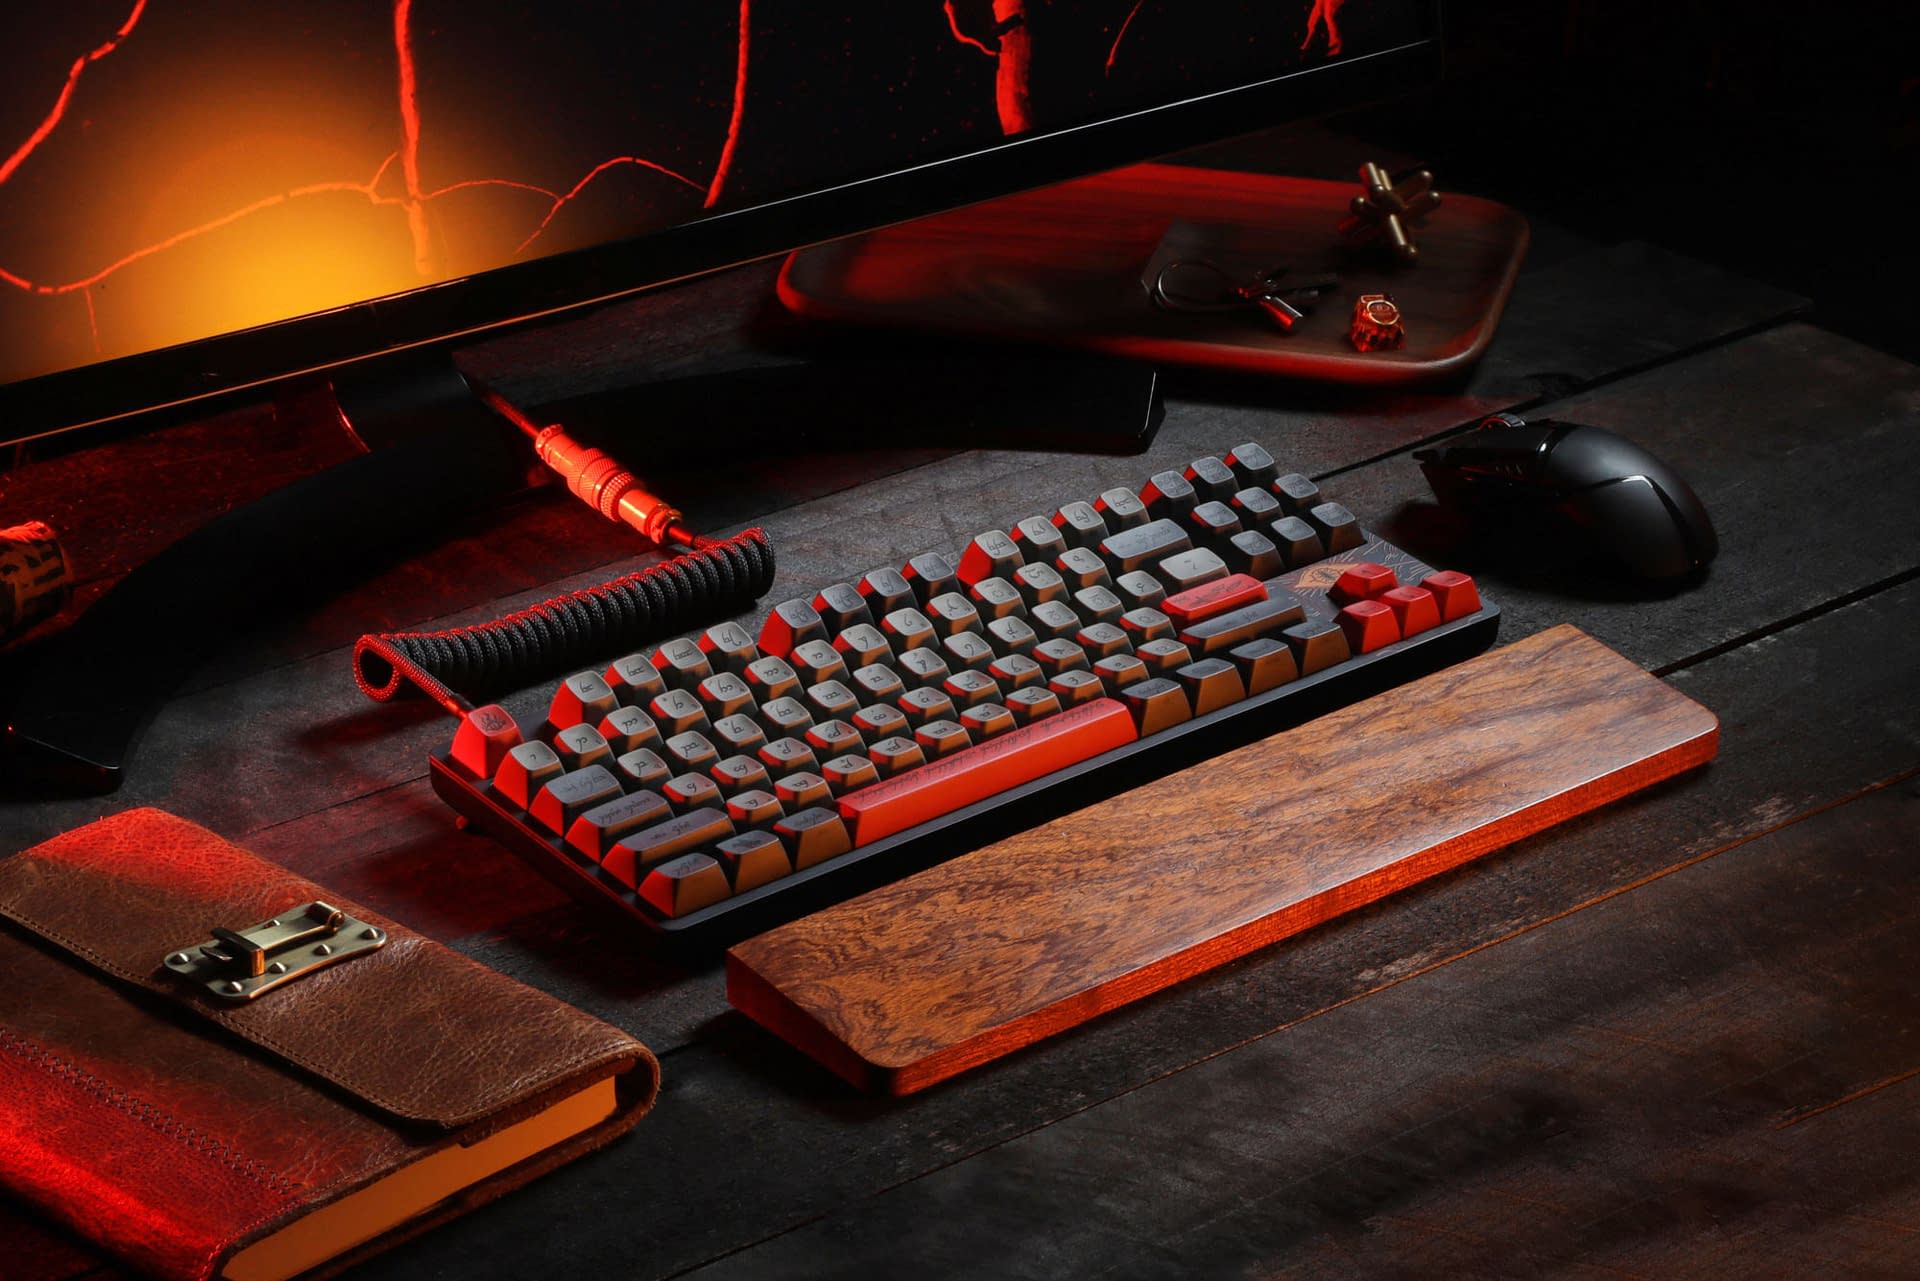 Return to Mordor with Drop's Latest The Lord of the Rings Keyboard